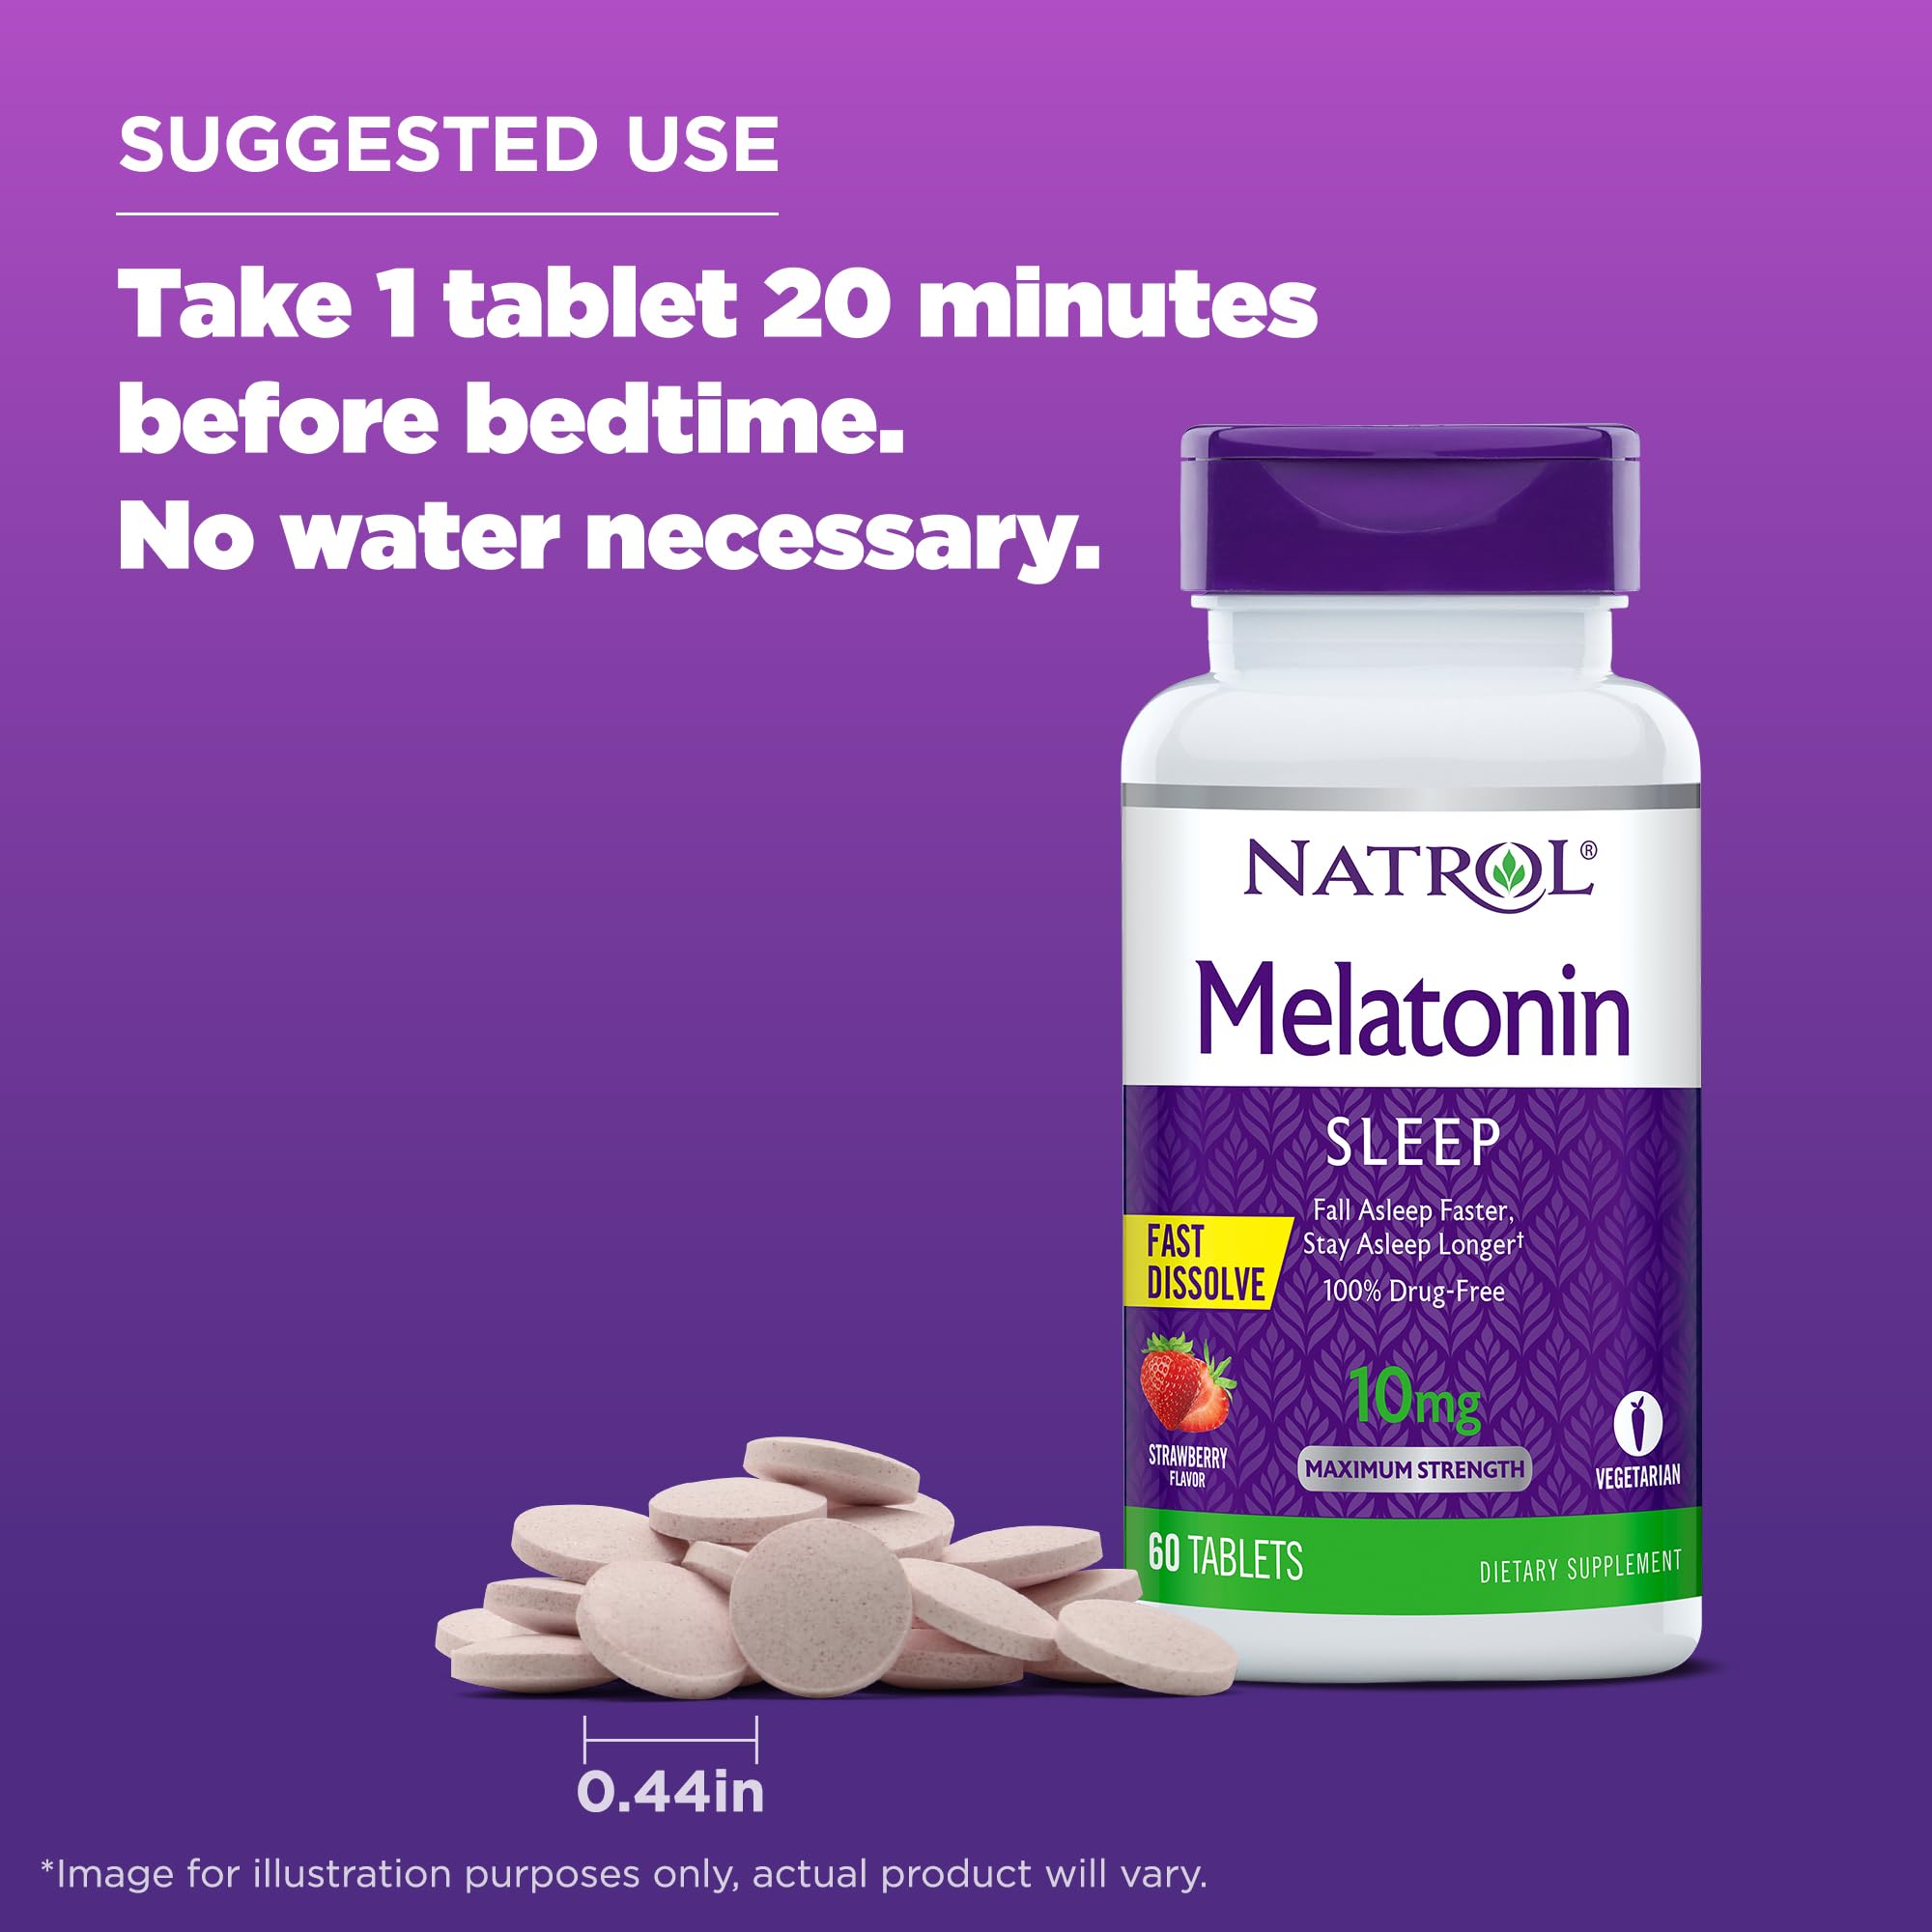 Natrol Melatonin Fast Dissolve Tablets, Helps You Fall Asleep Faster, Stay Asleep Longer, Easy to Take, Dissolve in Mouth, Strengthen Immune System, Maximum Strength, Strawberry Flavor, 10mg, 60 Count